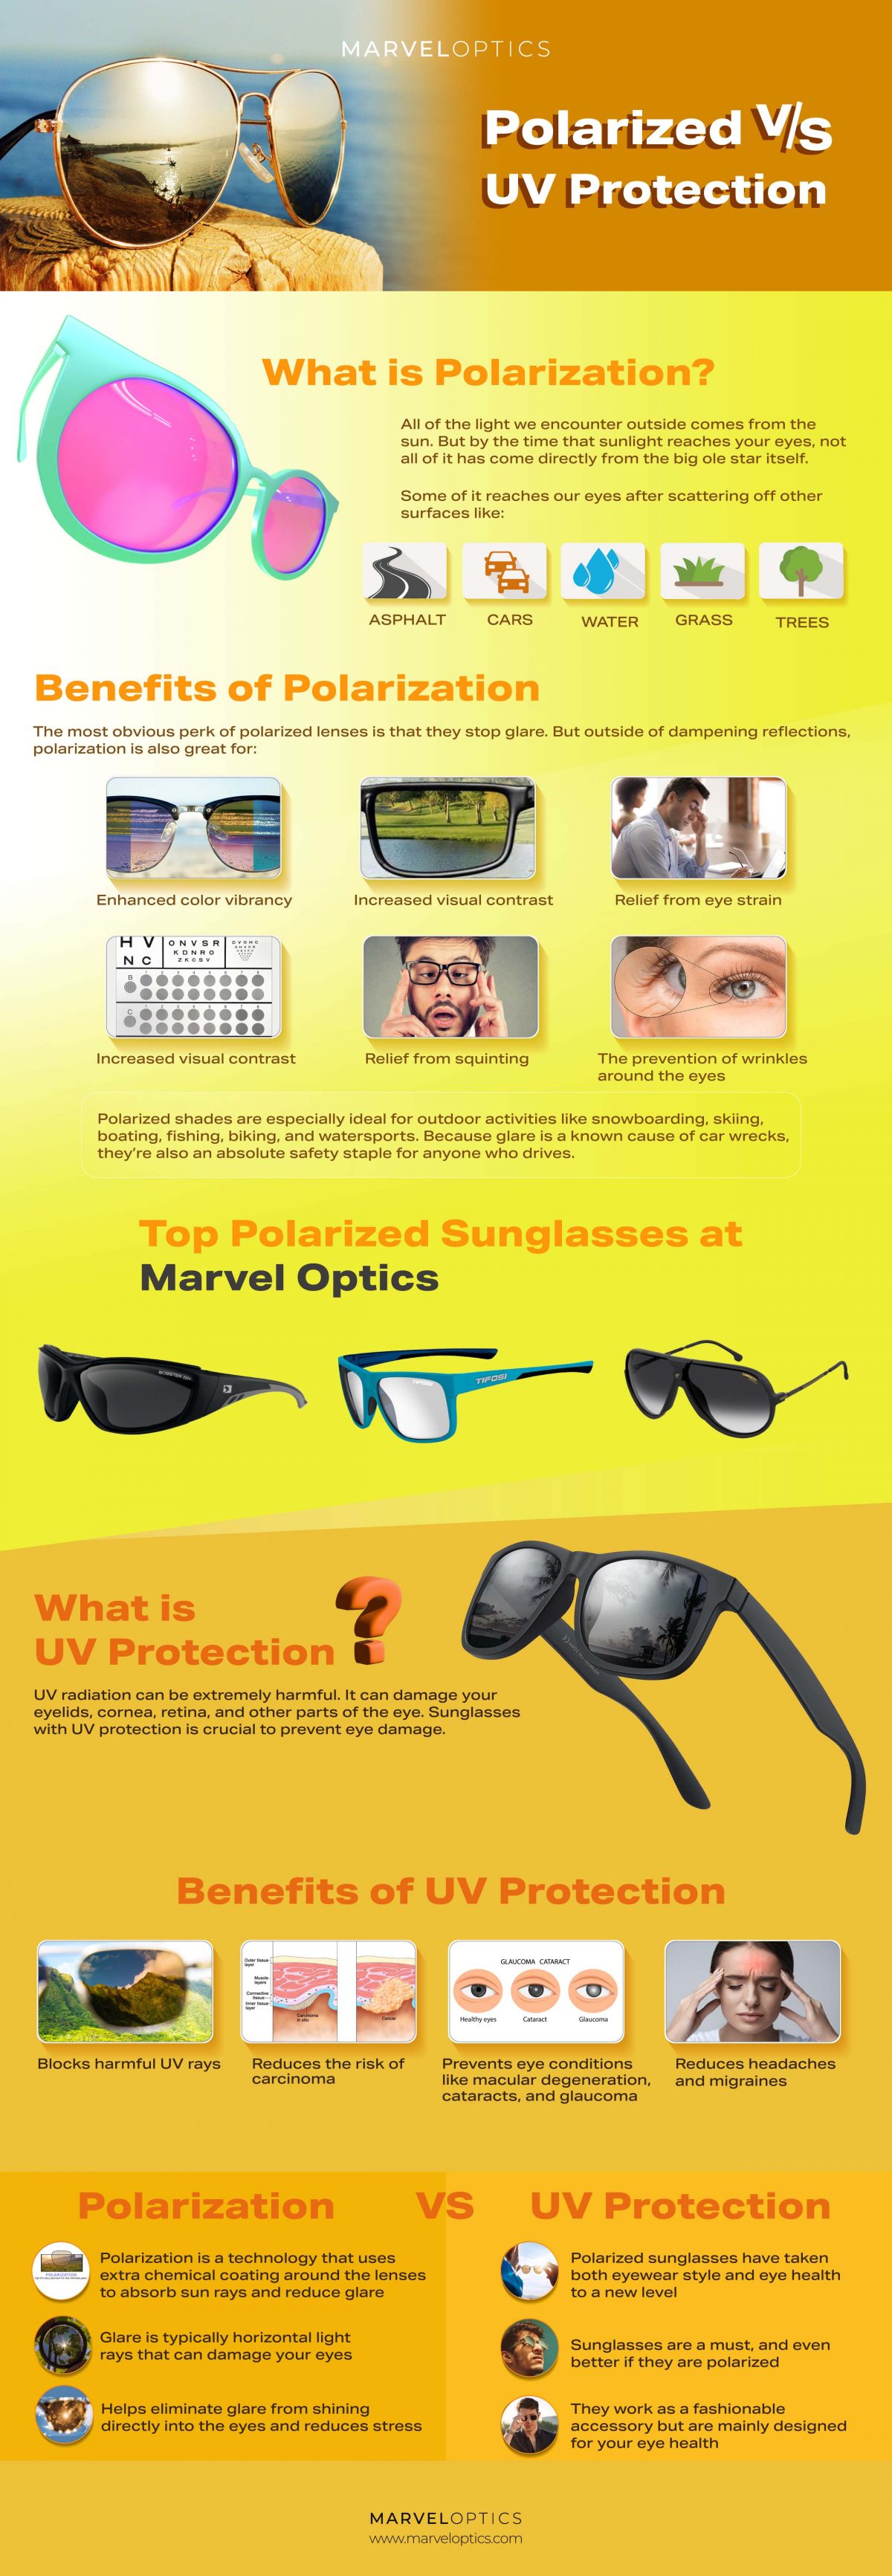 What Colour is most UV resistant?